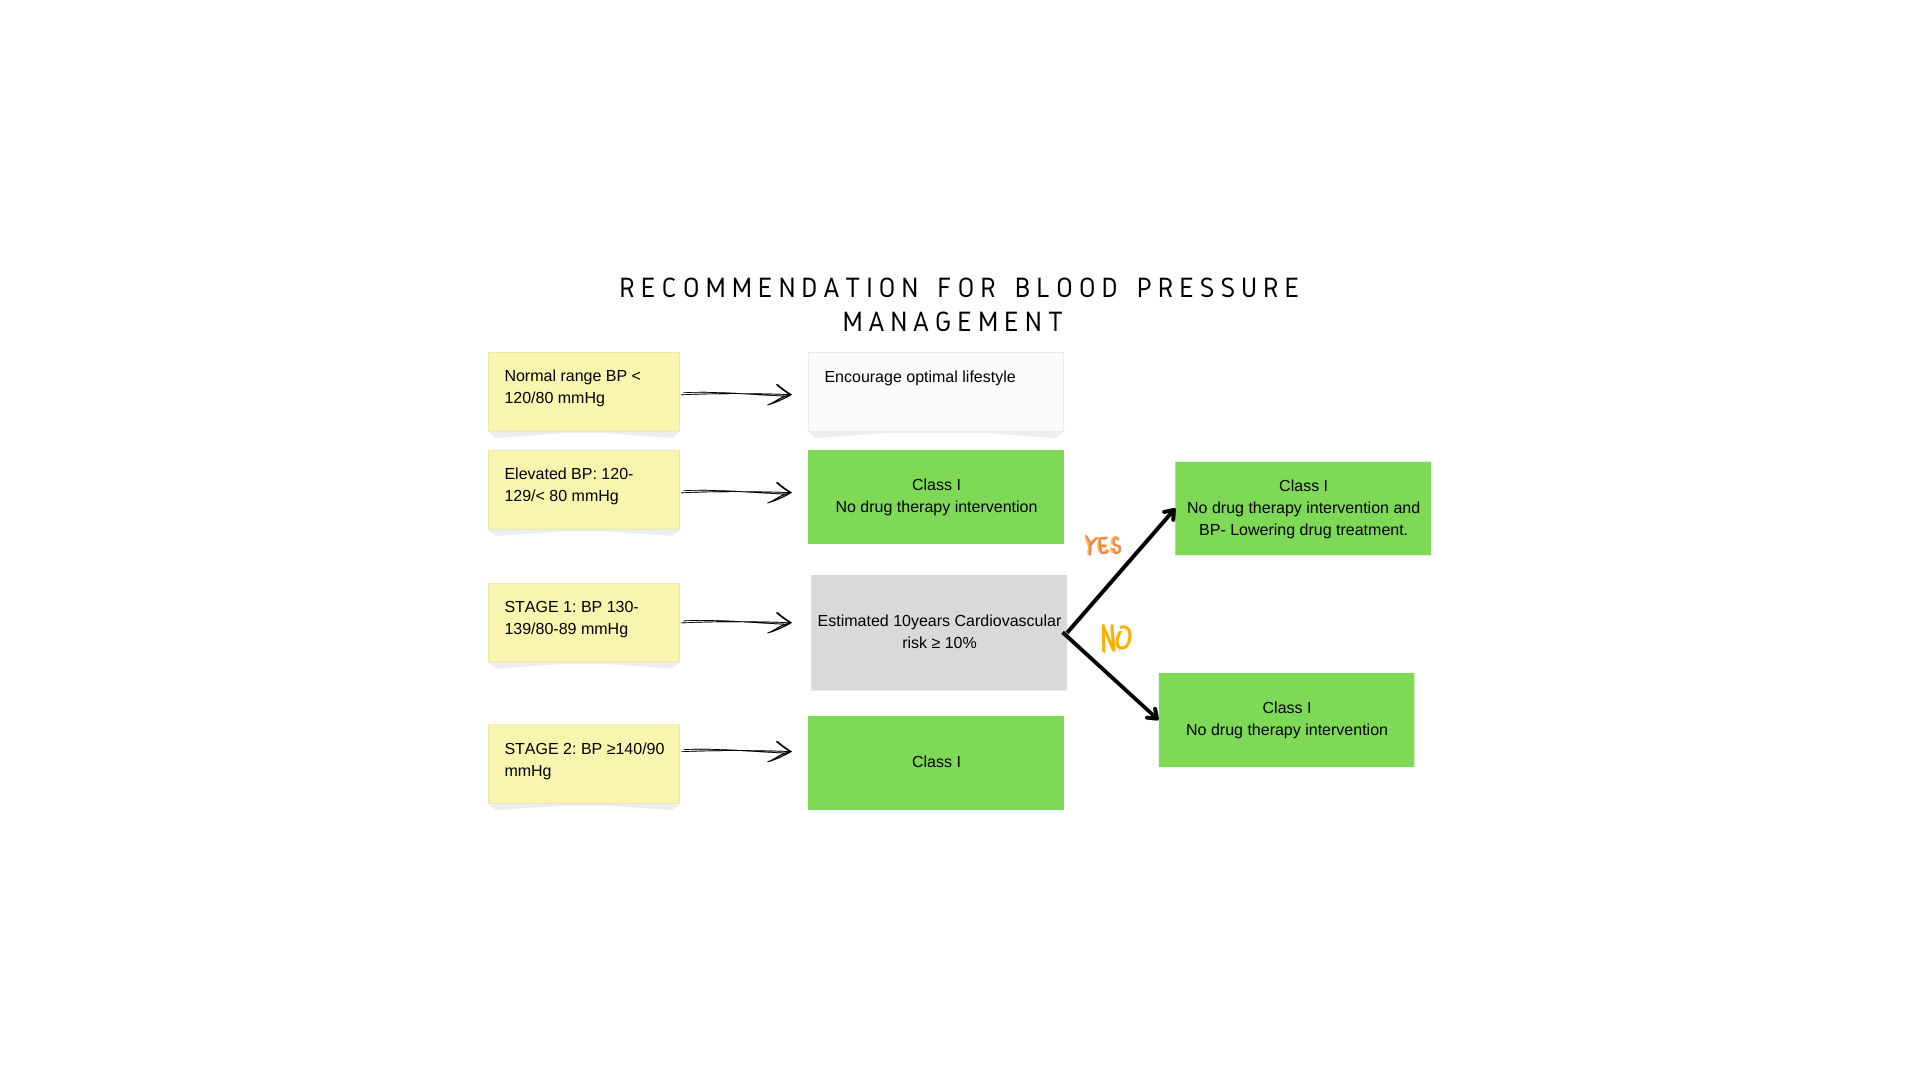 File:Recommendation for blood pressure management. Adapted from the 2019 ACC-AHA Guideline on the Primary Prevention of Cardiovascular Disease. .png